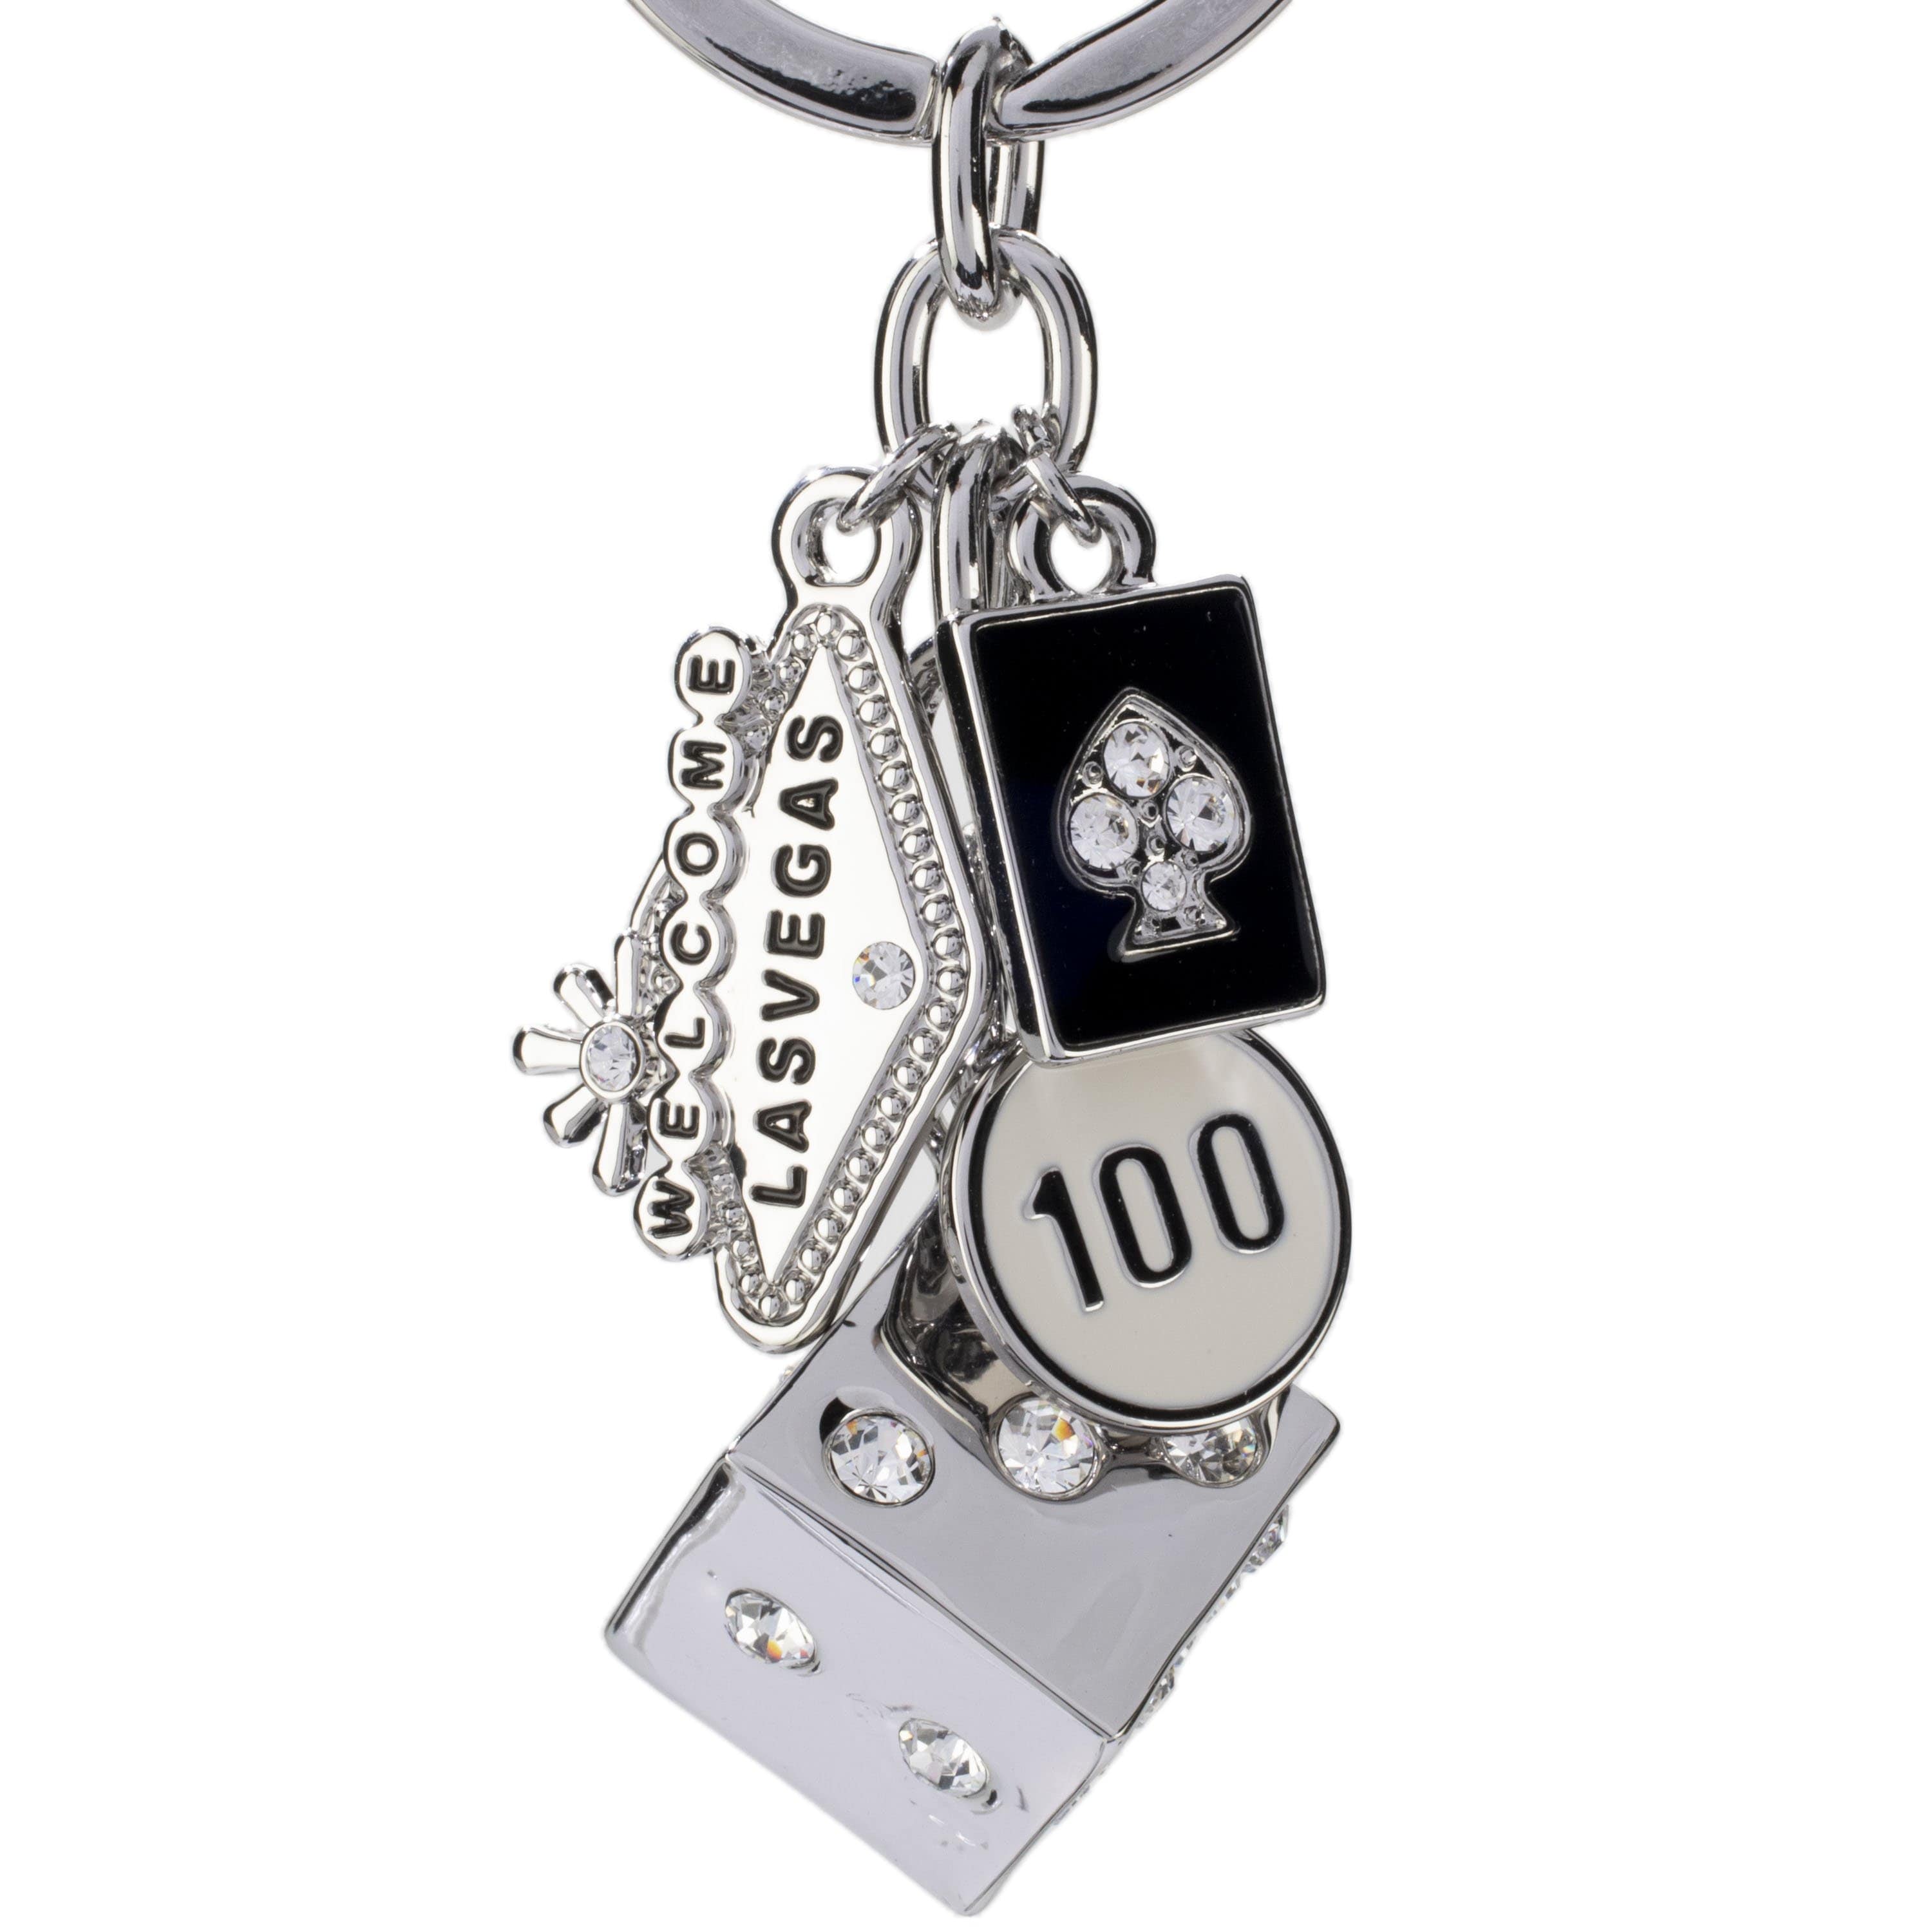 Alexander KALIFANO SKC-186 Las Vegas Welcome Sign Silver Dice Keychain Made with Clear Crystals